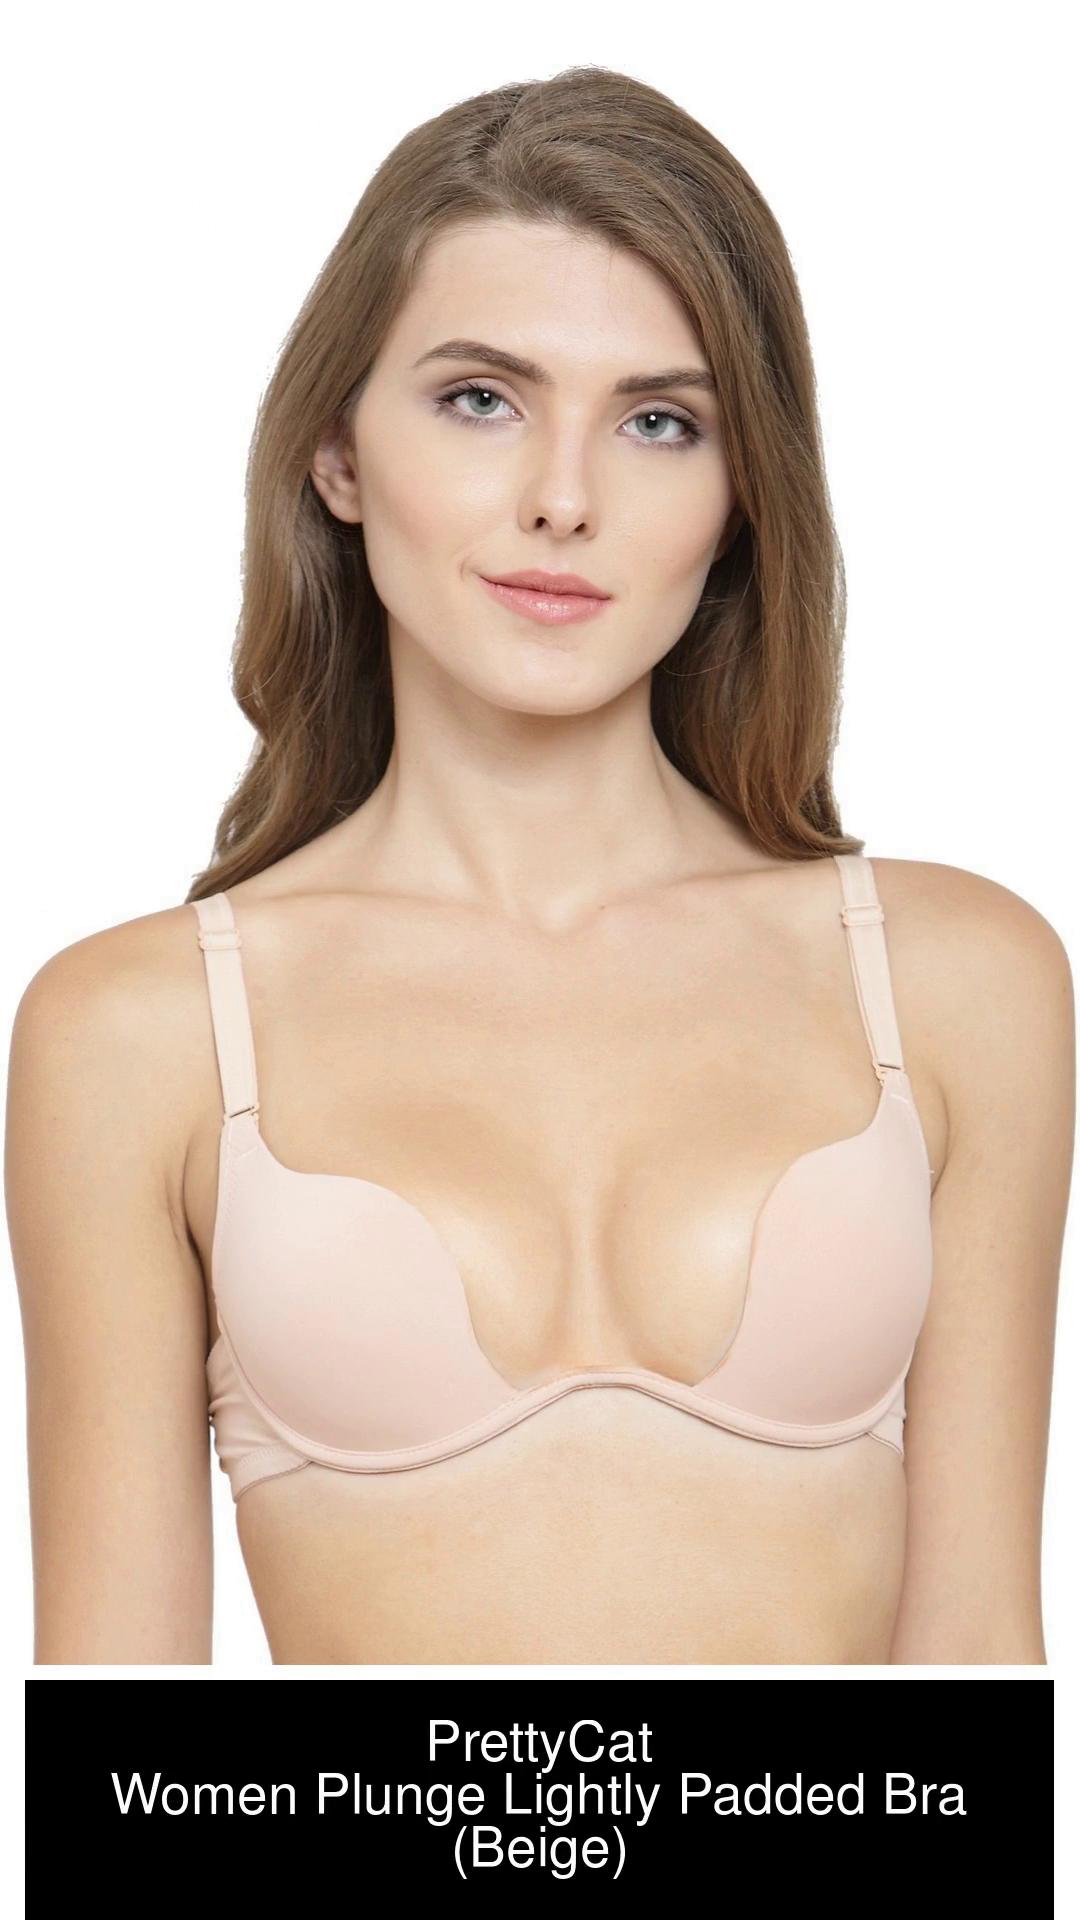 Buy Quttos PrettyCat Lightly Pushup Padded Non-Wired Cage Neck Bralette Bra  Panty Set Beige at